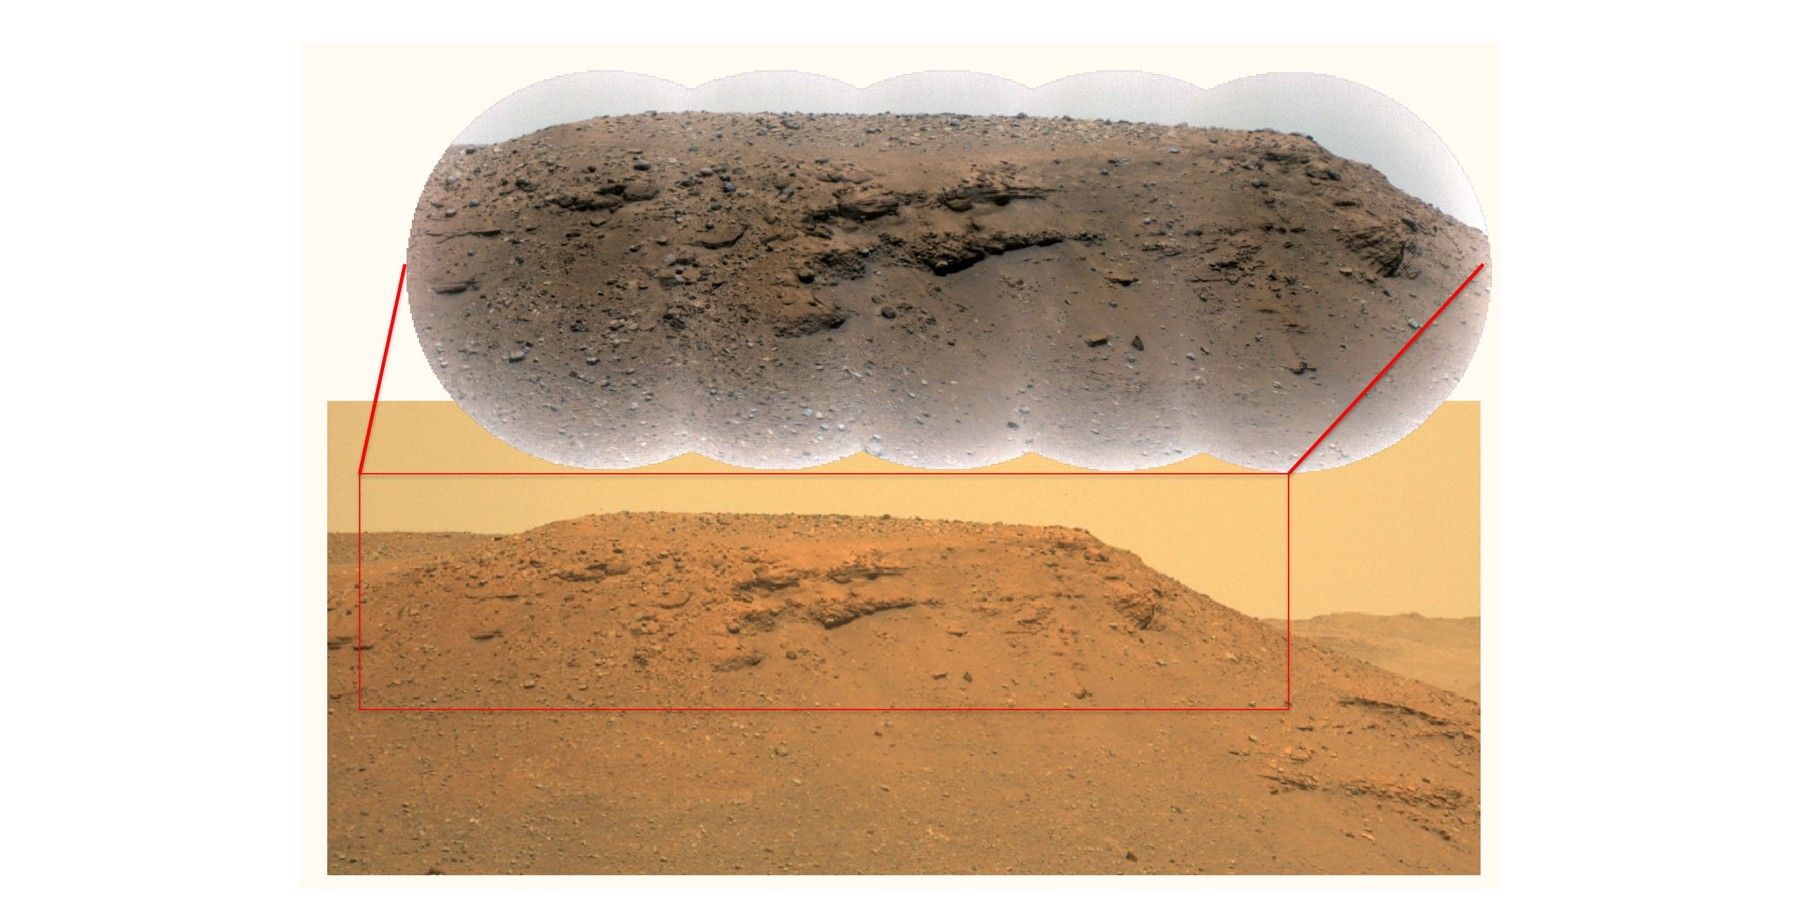 Perseverance Rover Images Confirm Presence of Lake On Ancient Mars